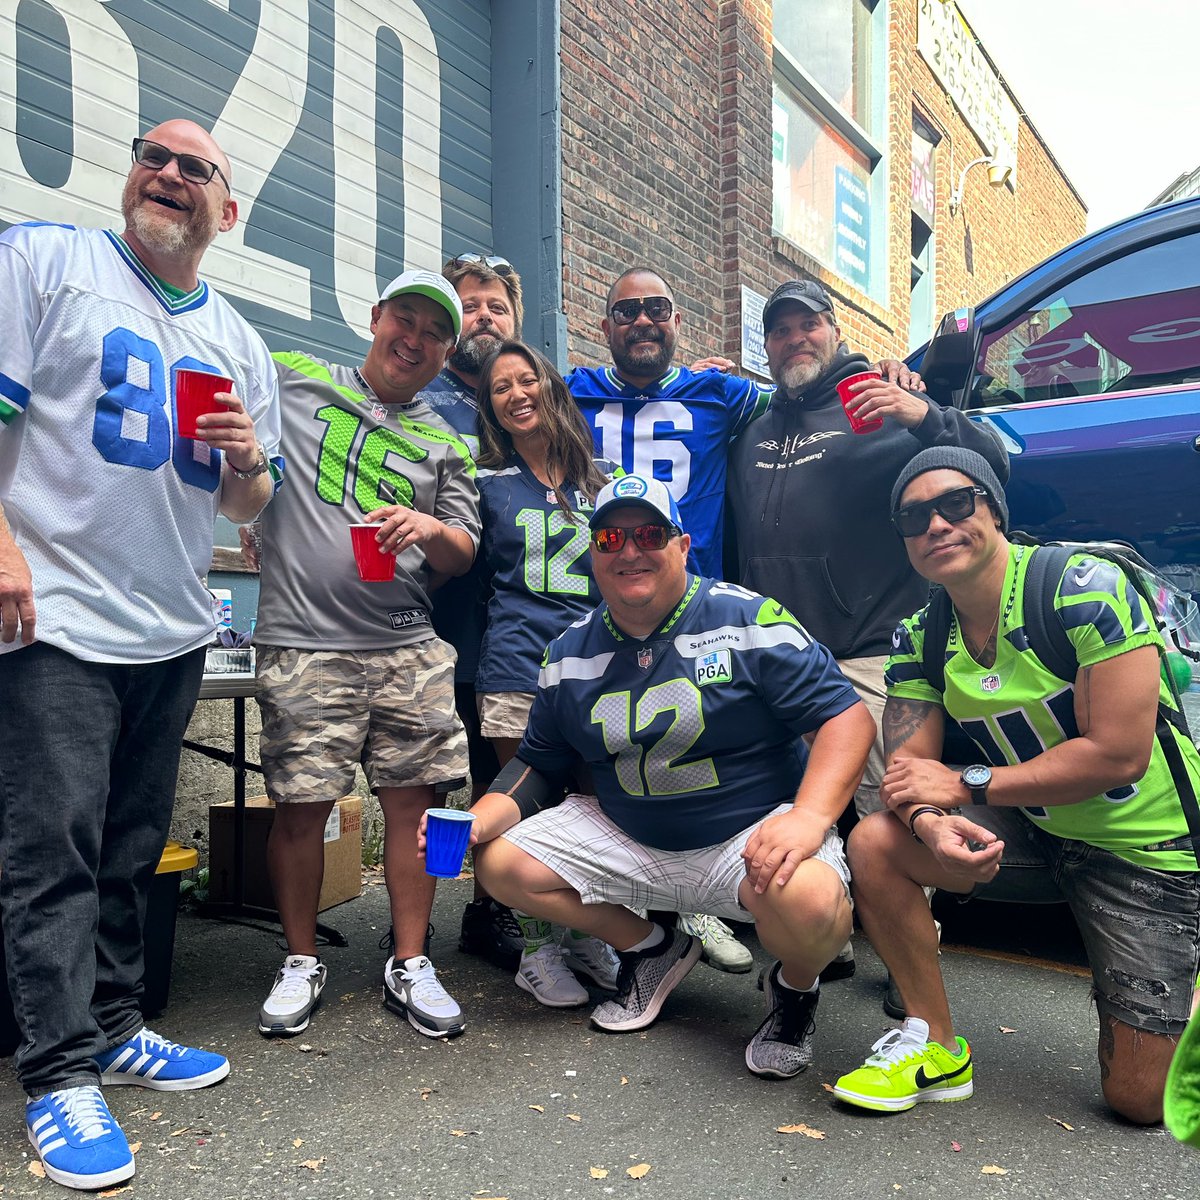 With the OG 12 Crew. It’s about to get LOUD vs Rams. . #12s #Fitness #Super12 #Superhawk #gymmotivation #fitnessmotivation #pnw #tattoo #backtattoo #twelfie #beach #upperleftusa #weightlifting #citylife #seattle #NFL #seavsla